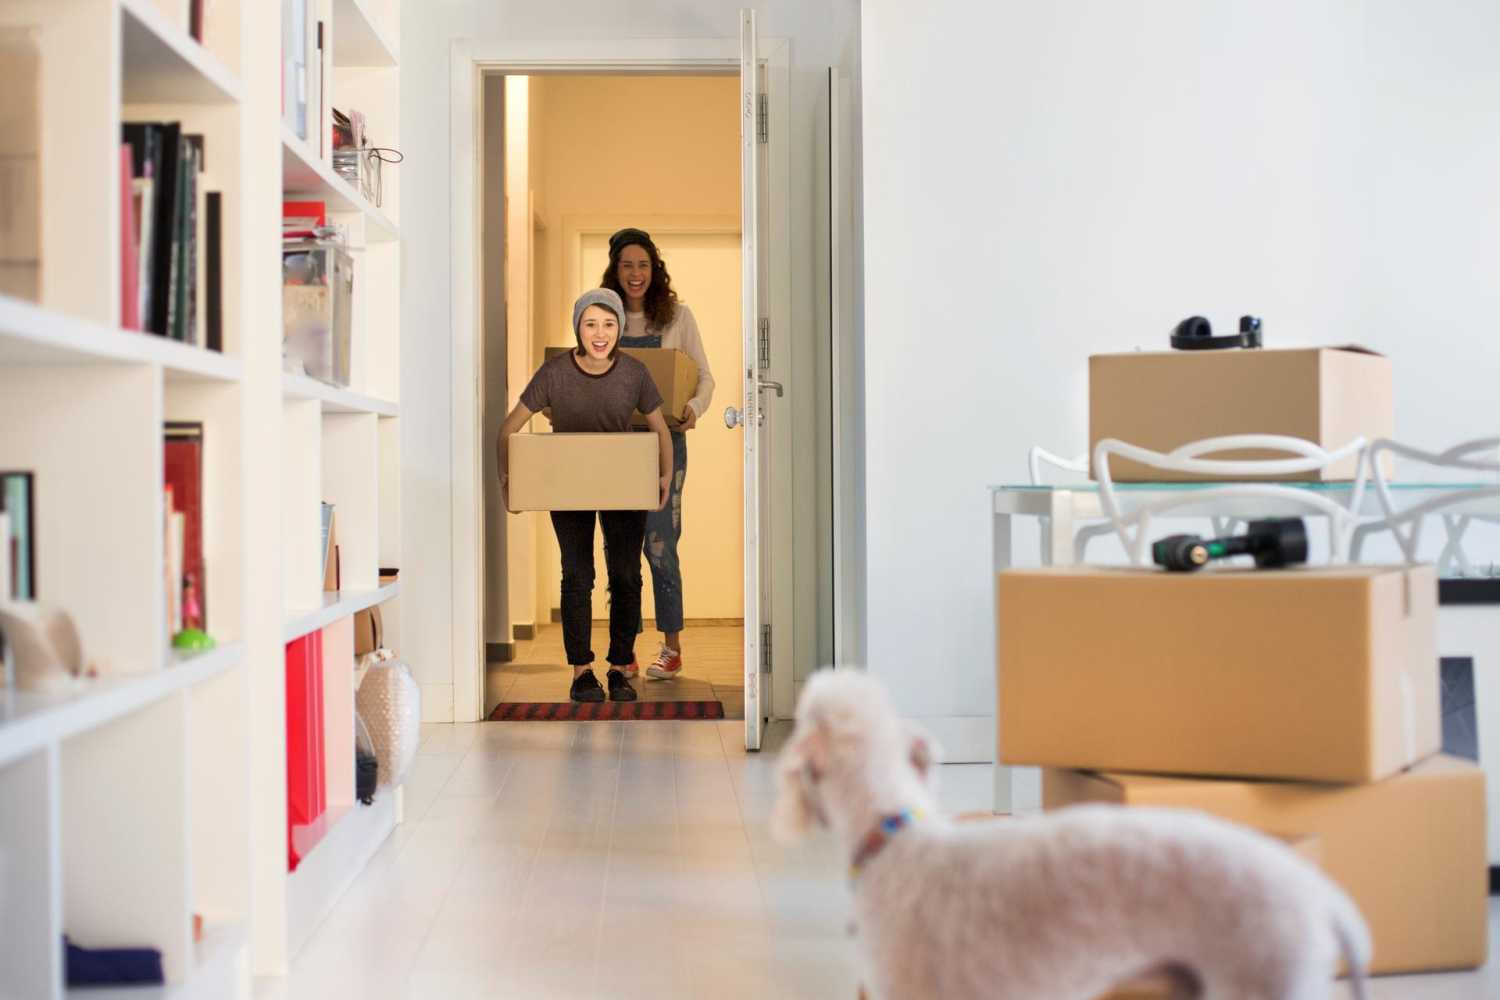 Women moving in to new home, dog greeting them